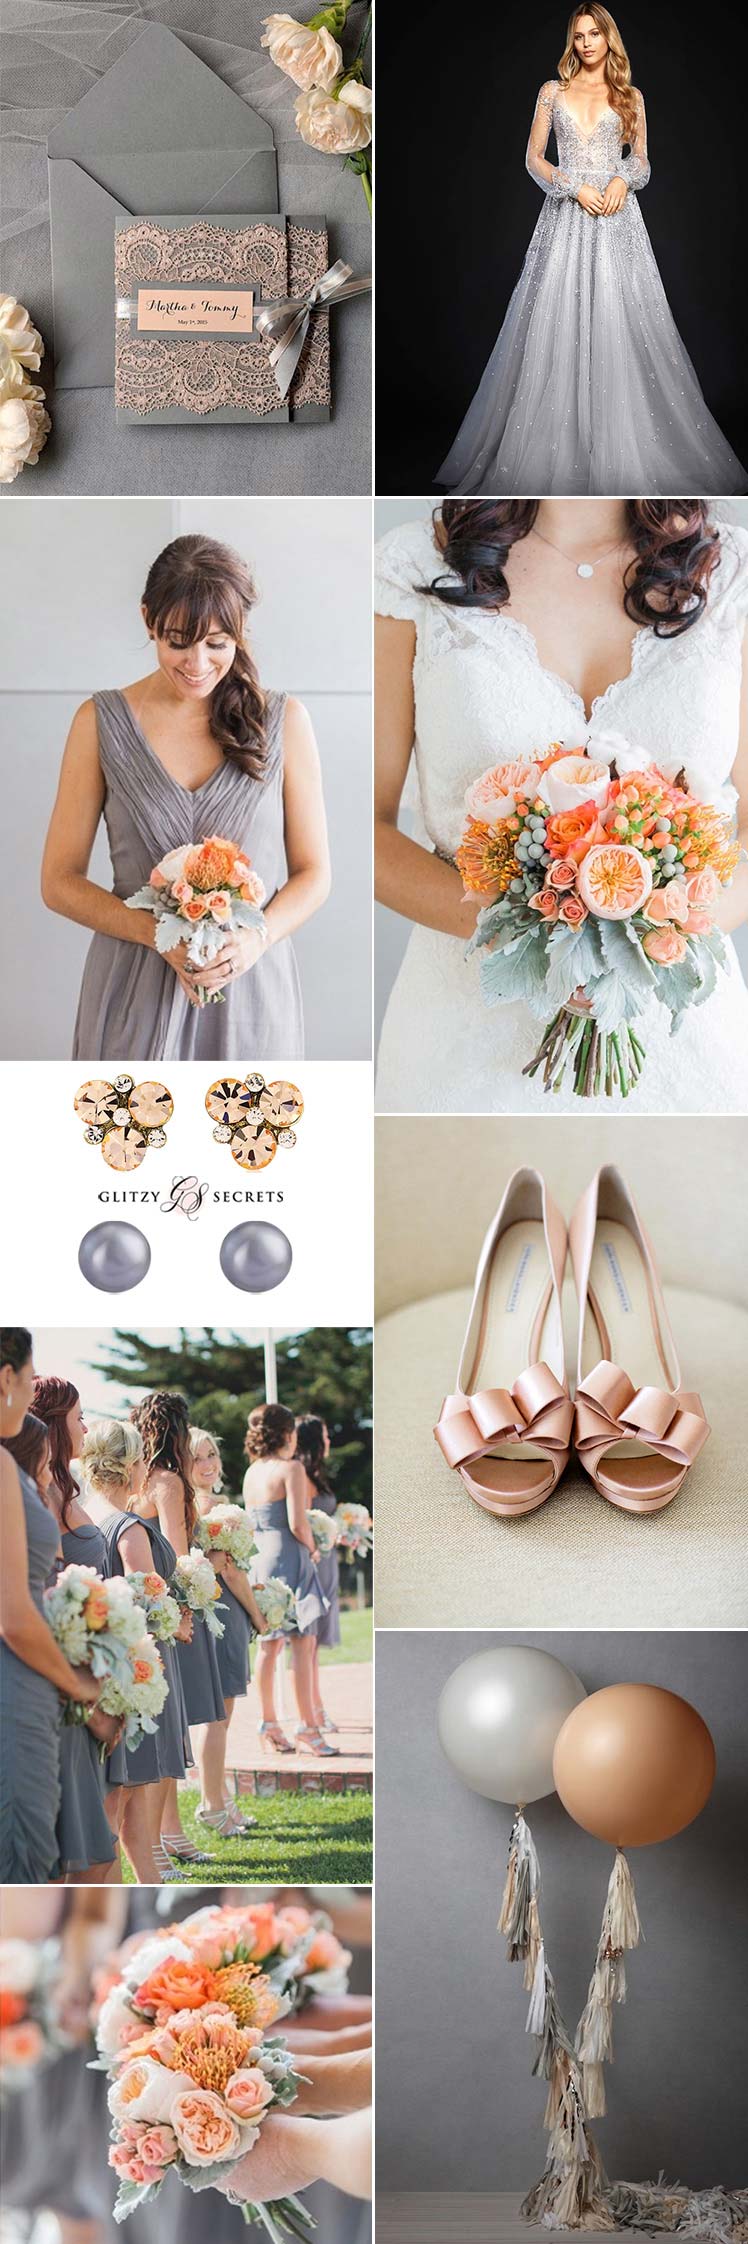 Charcoal and peach wedding inspiration